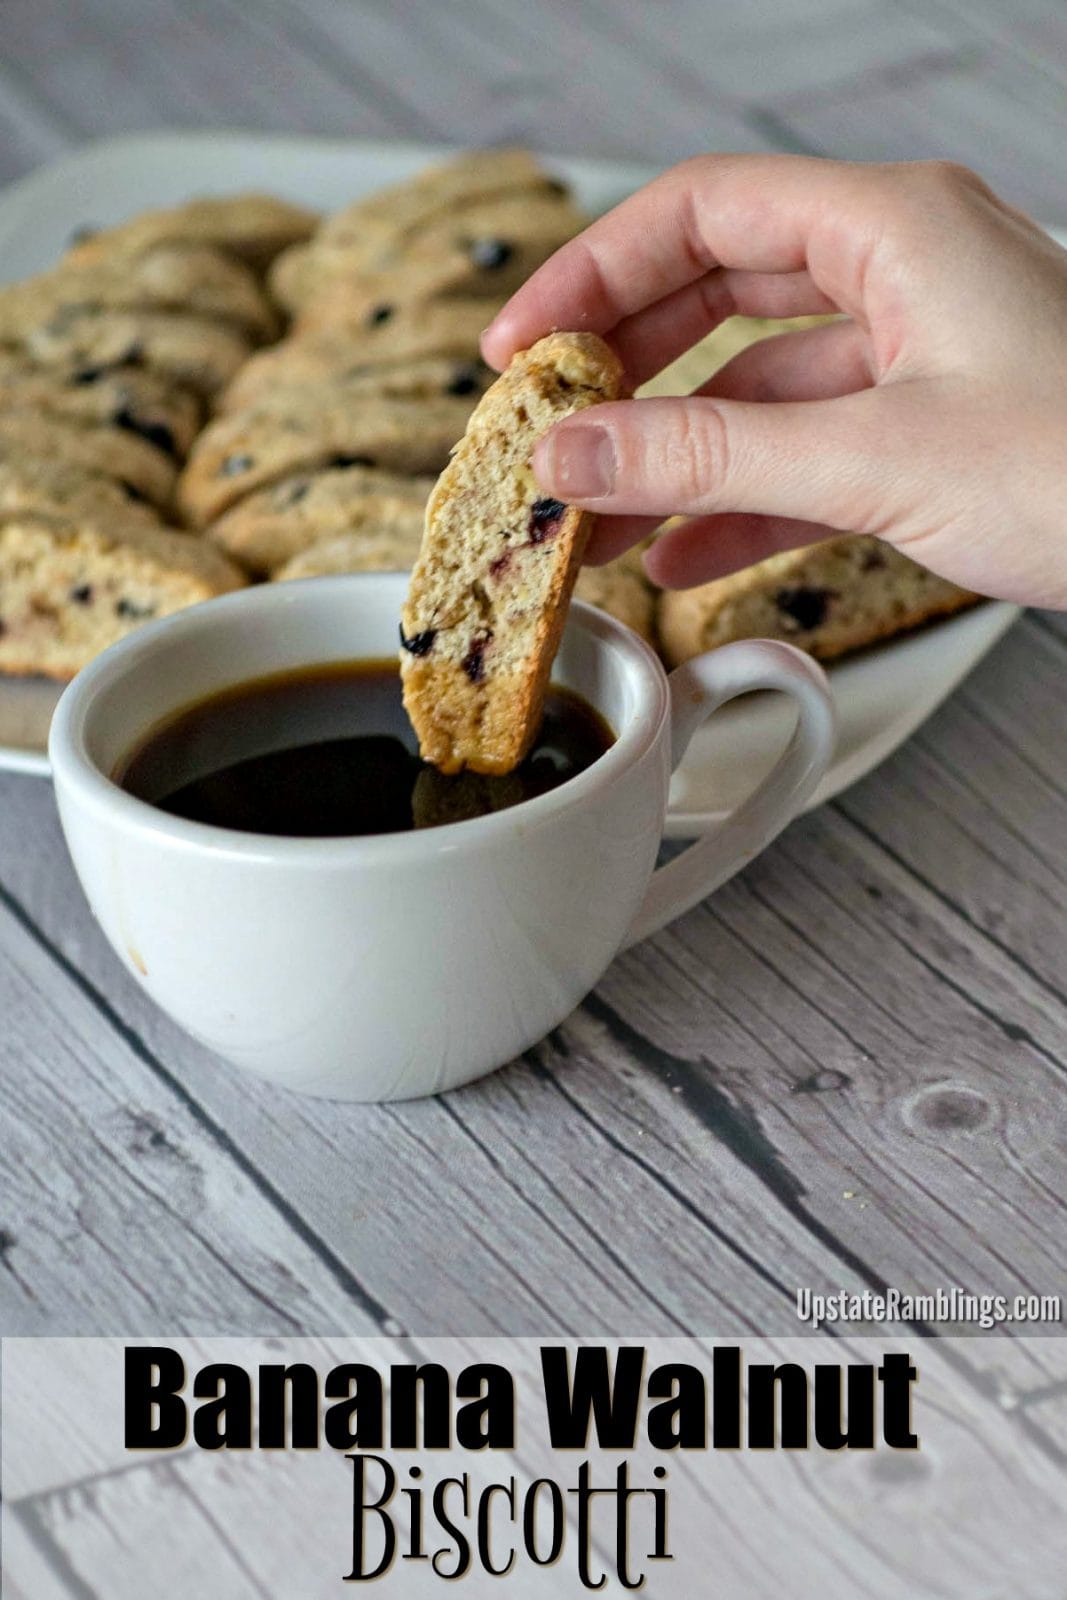 Banana Walnut Biscotti Cookies with dried blueberries